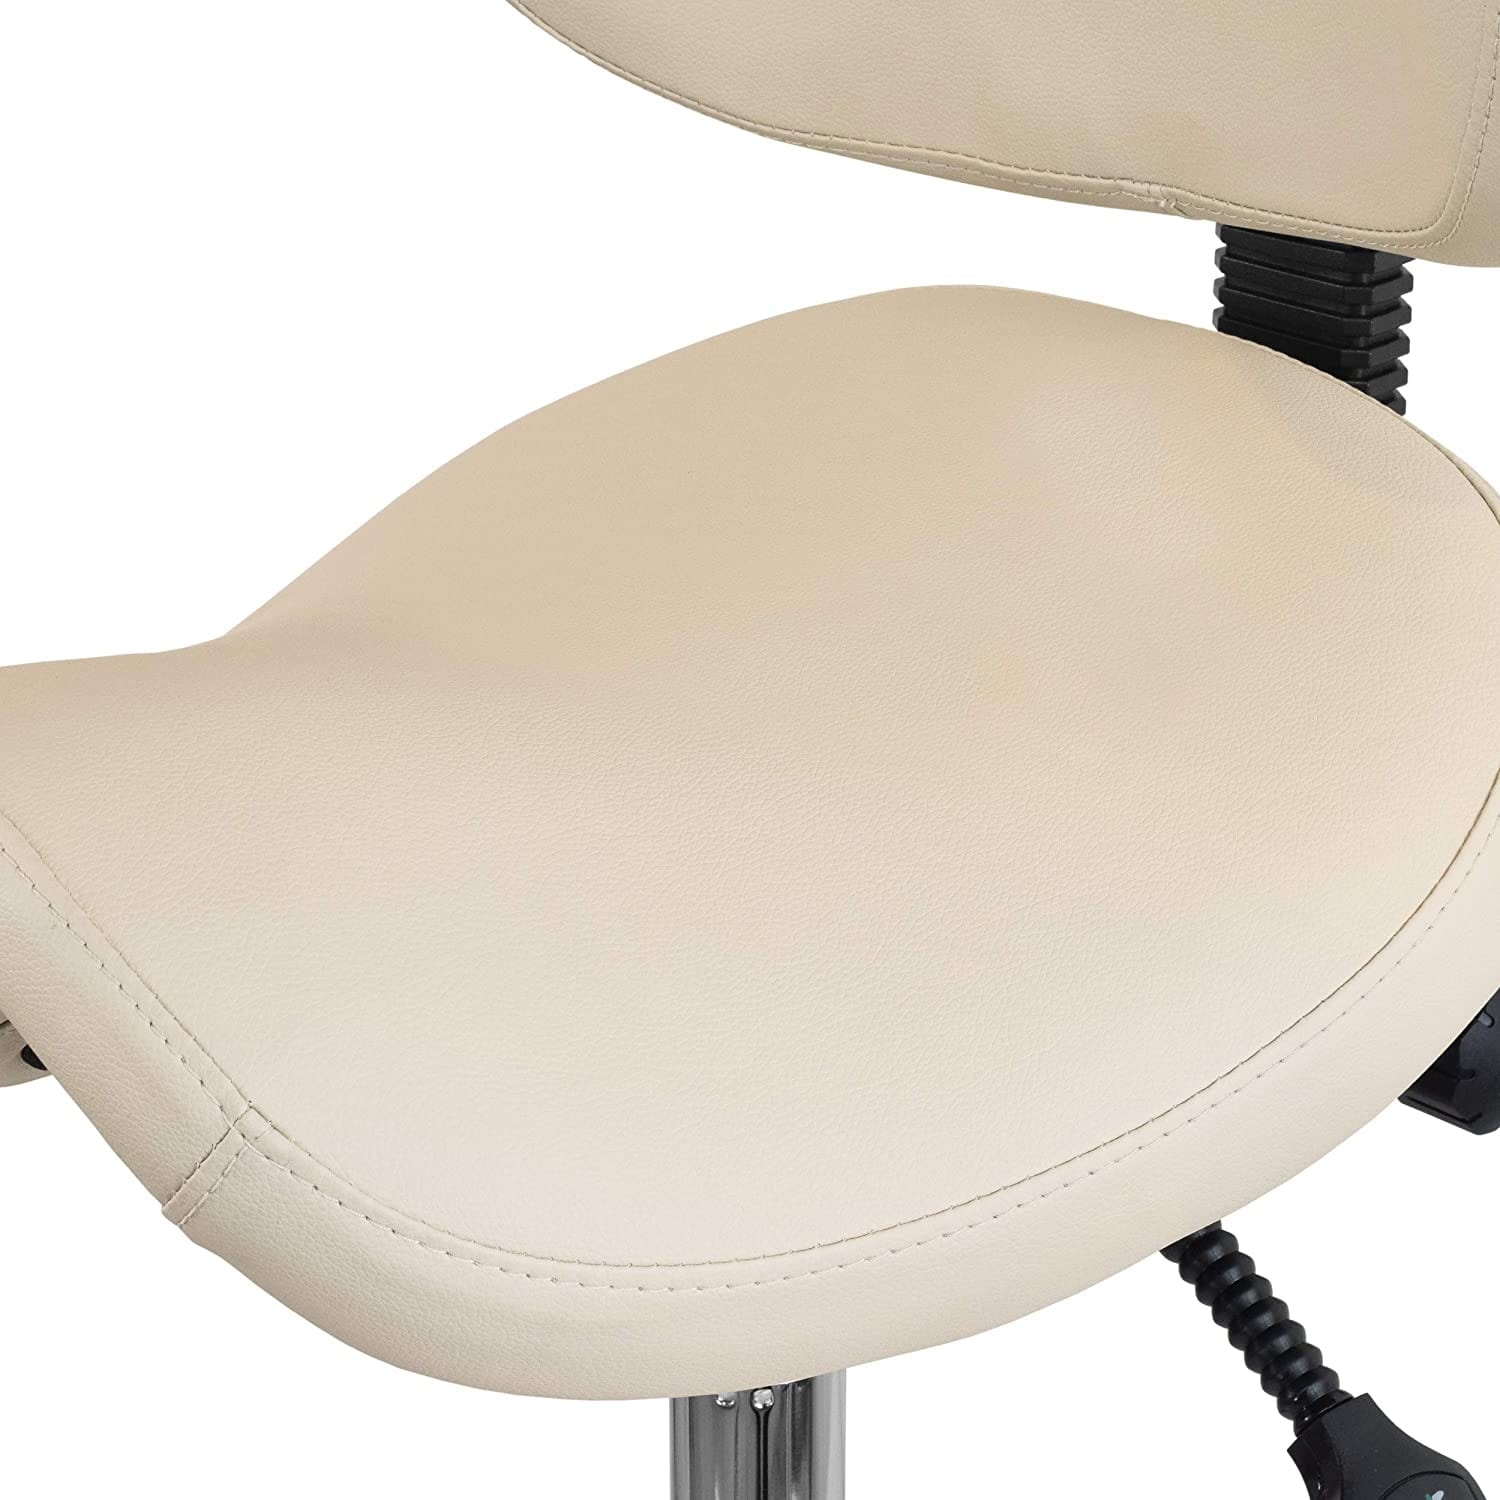 https://ak1.ostkcdn.com/images/products/is/images/direct/2c5b7b12e89a46d389b270140cb6e1f243d353fa/2xhome-Ergonomic-Adjustable-Tilt-Saddle-Stool-Chair-With-Back-Support-Home-Office-Exam-Waiting-Rooms-Desk-Dentistry-Doctor.jpg